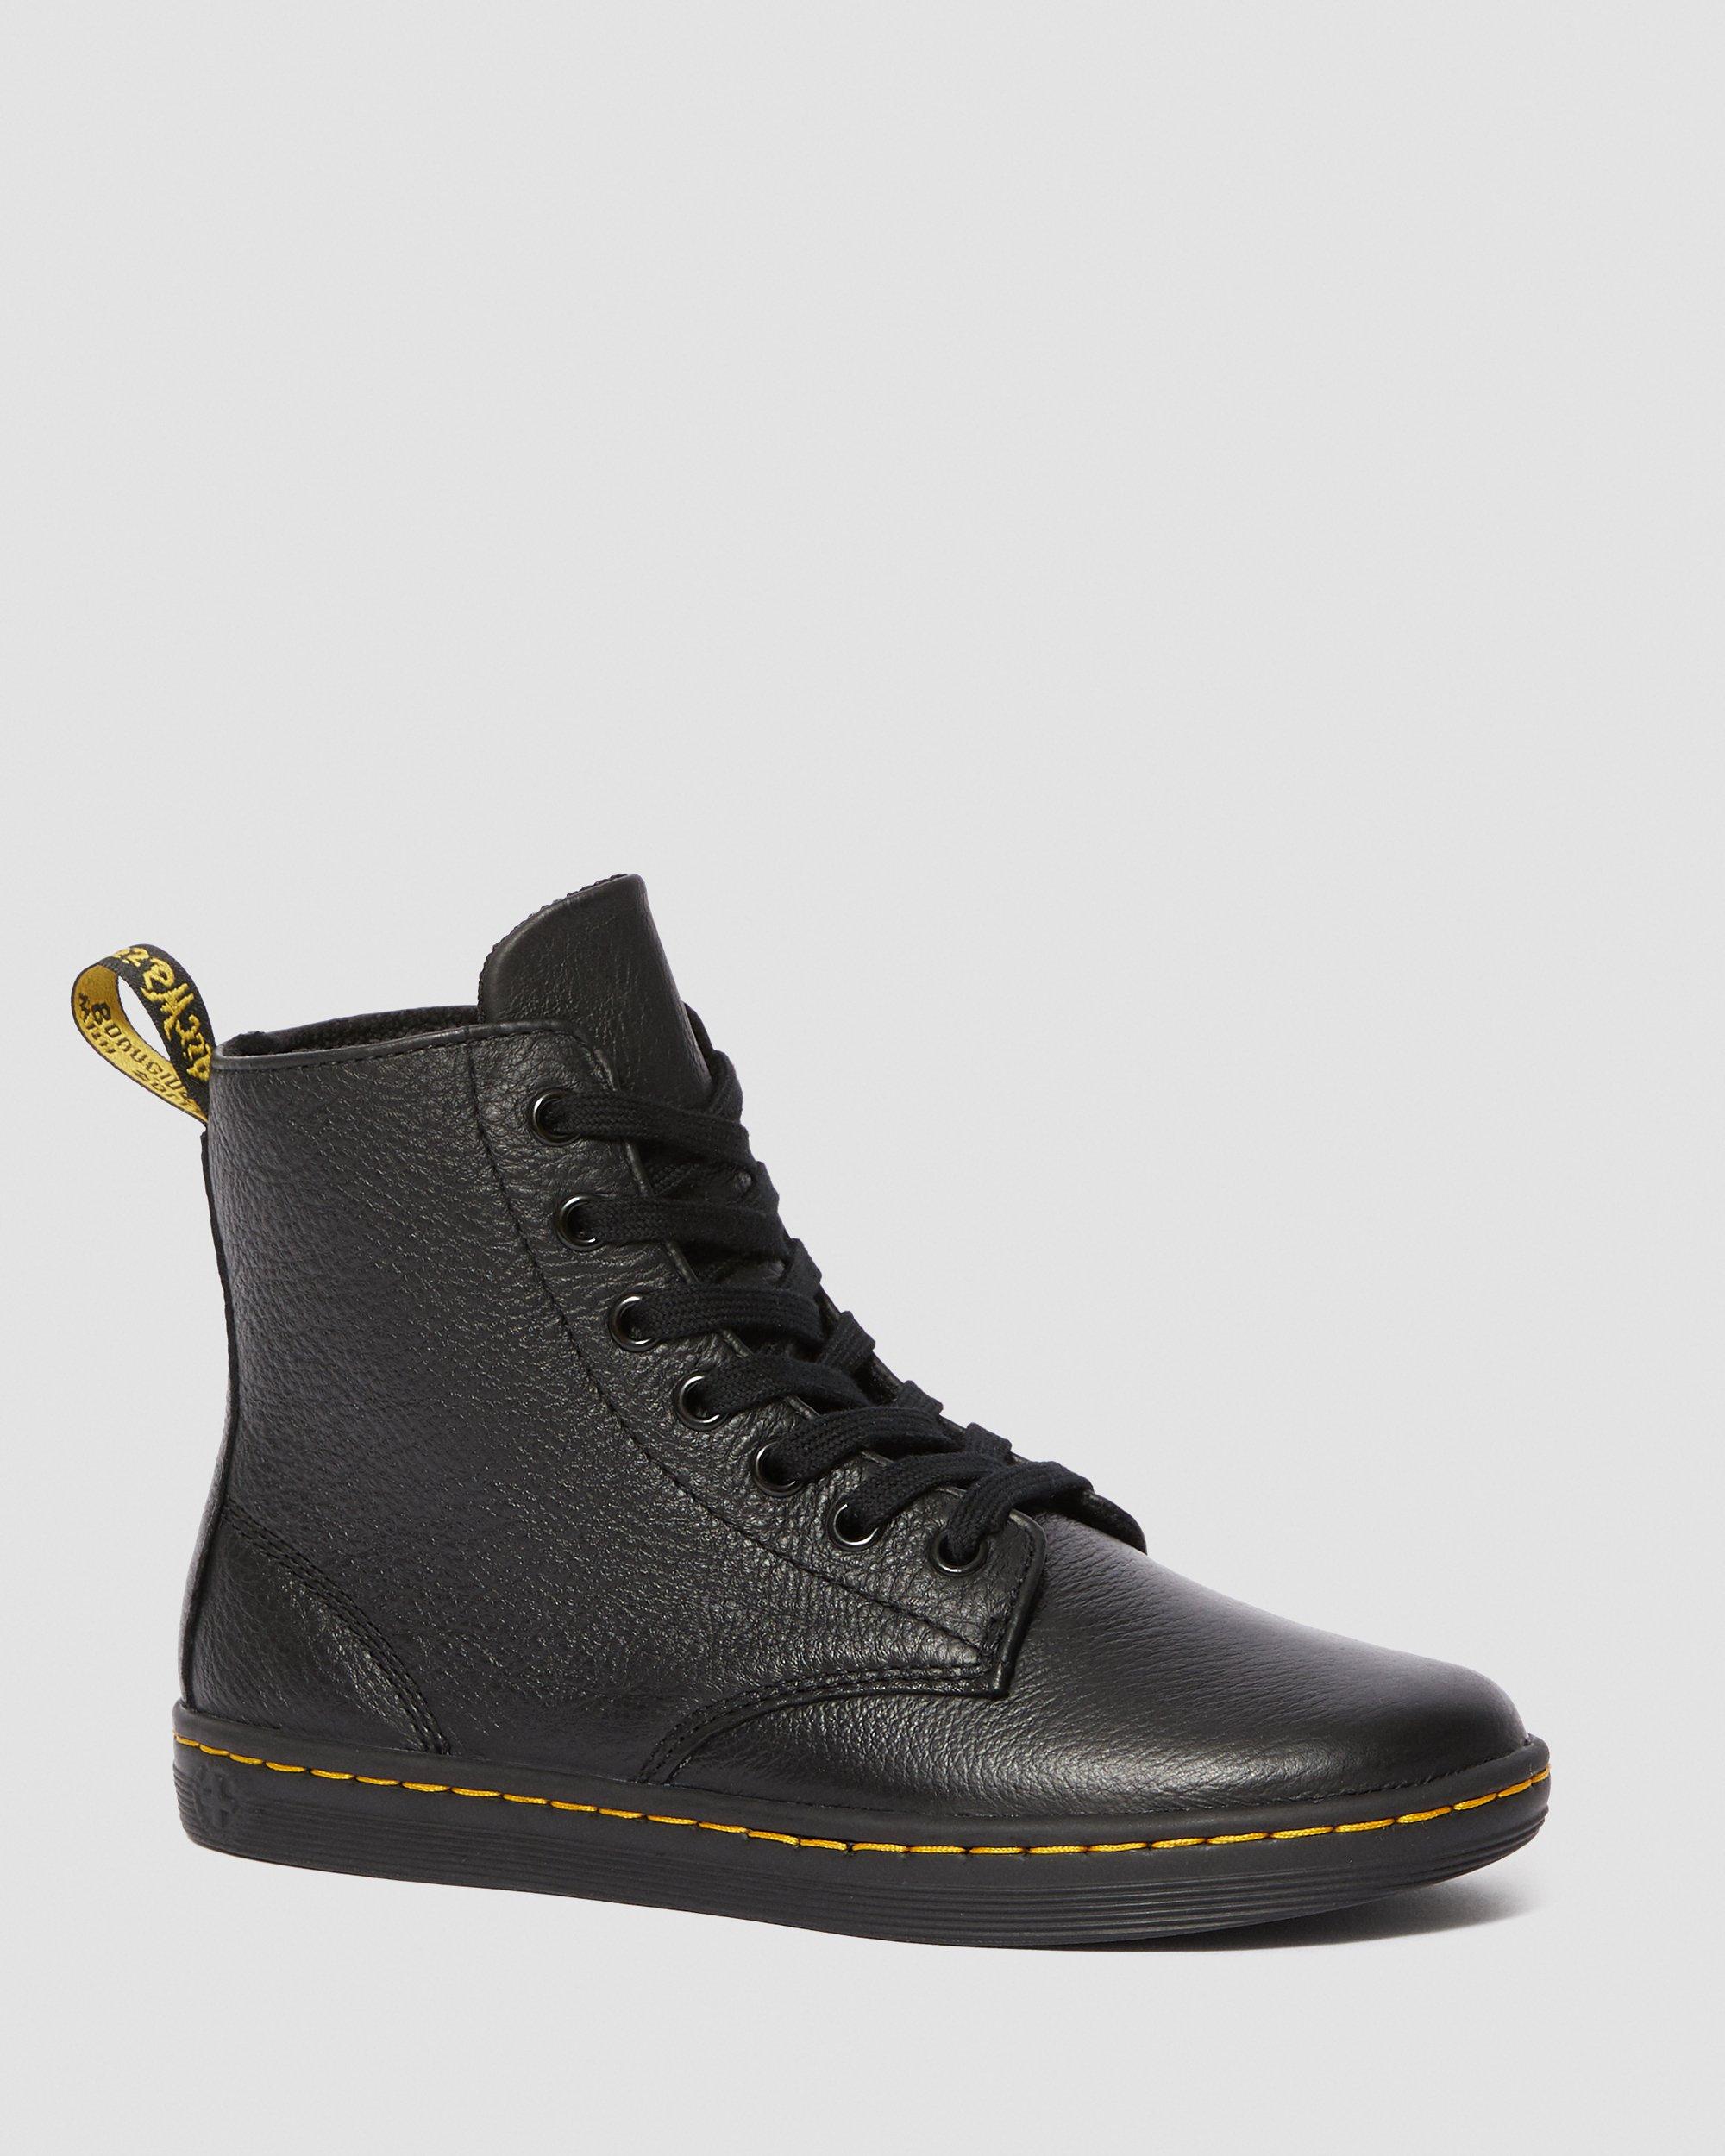 LEATHER CASUAL BOOTS | Dr. Martens